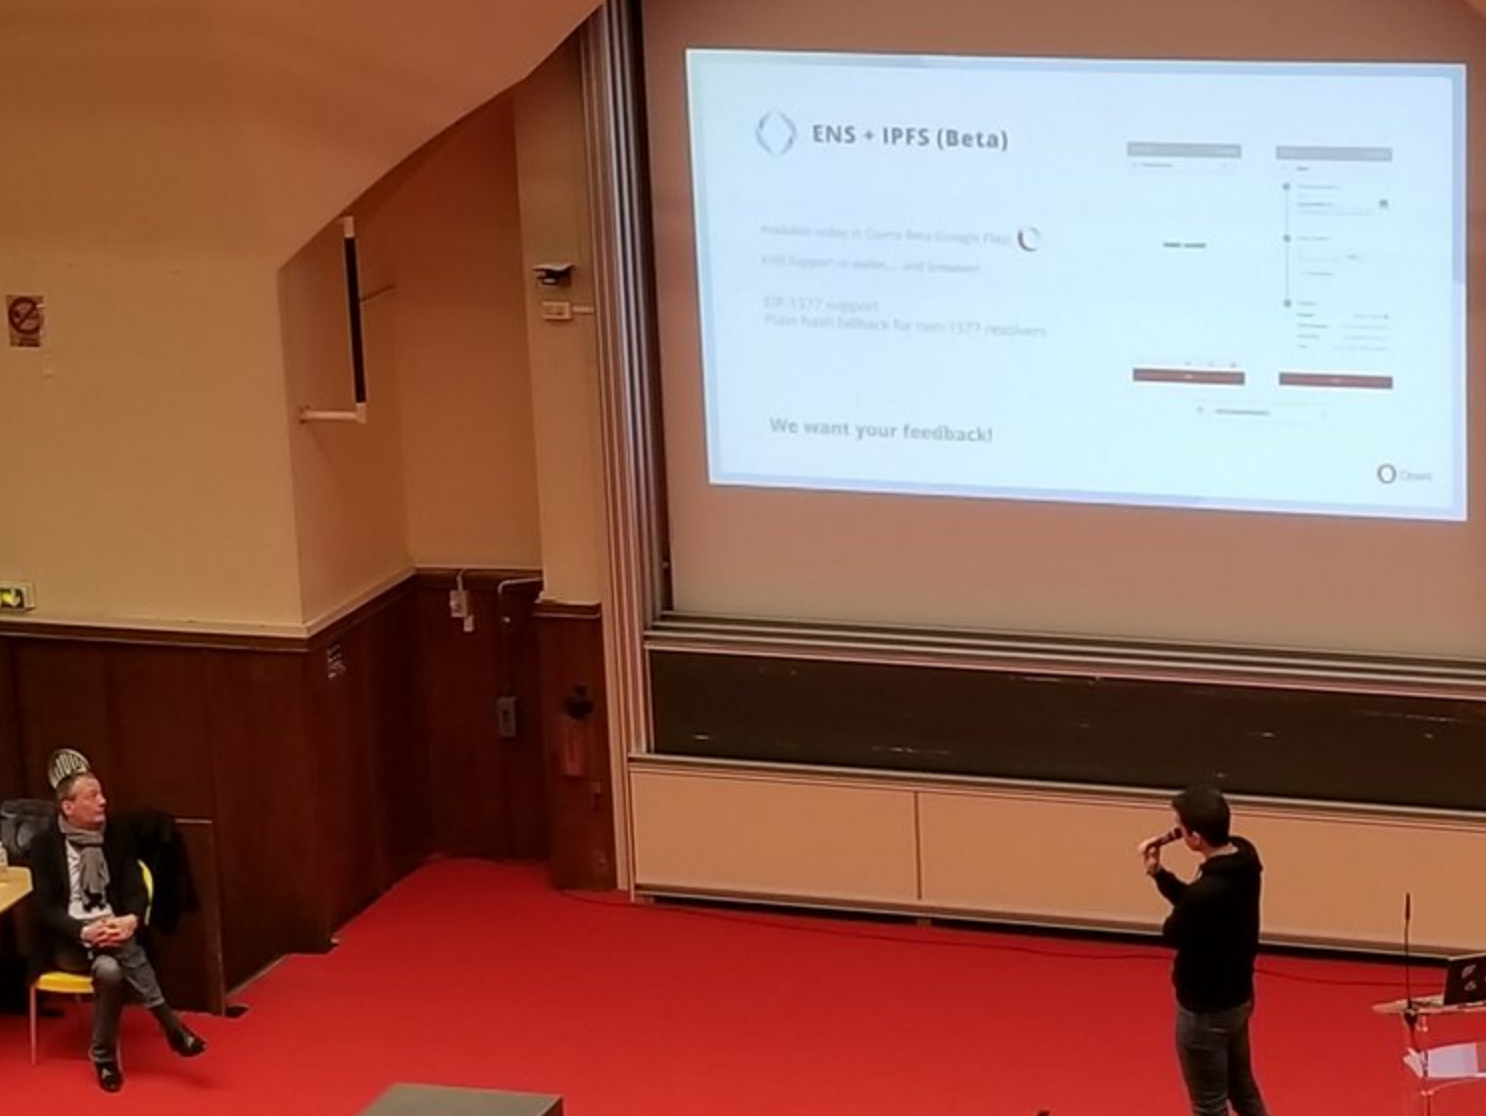 Opera announcing ENS and IPFS at EthCC March 2019